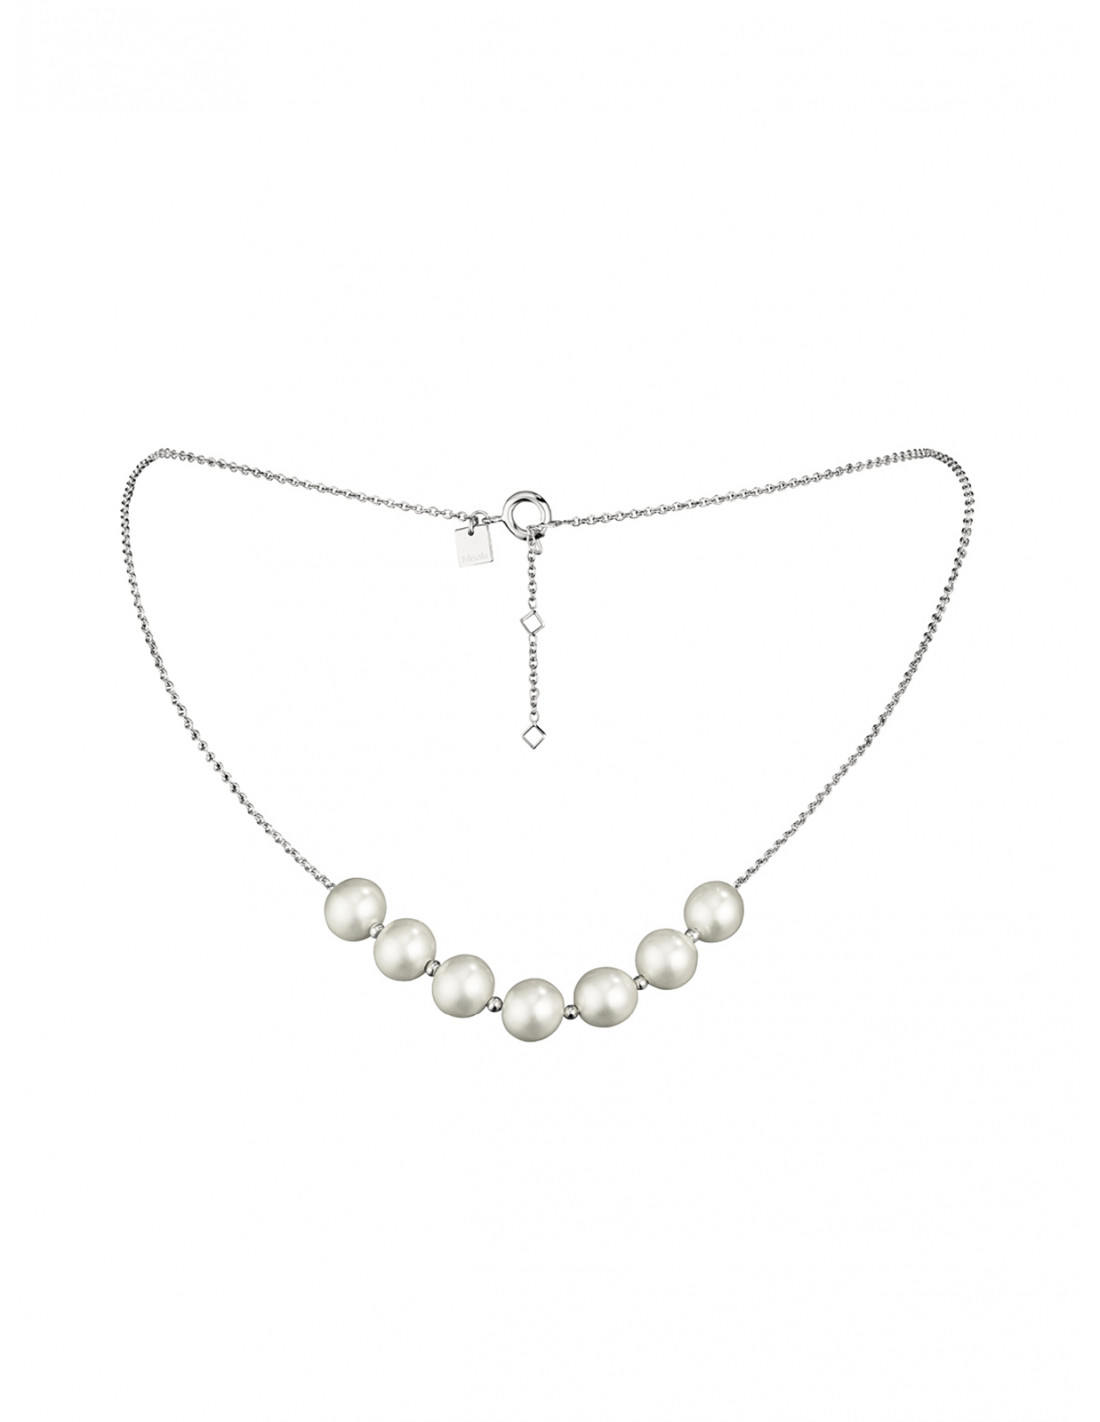 Silver BB chain necklace with white hand made glass pearls | Misaki Monaco